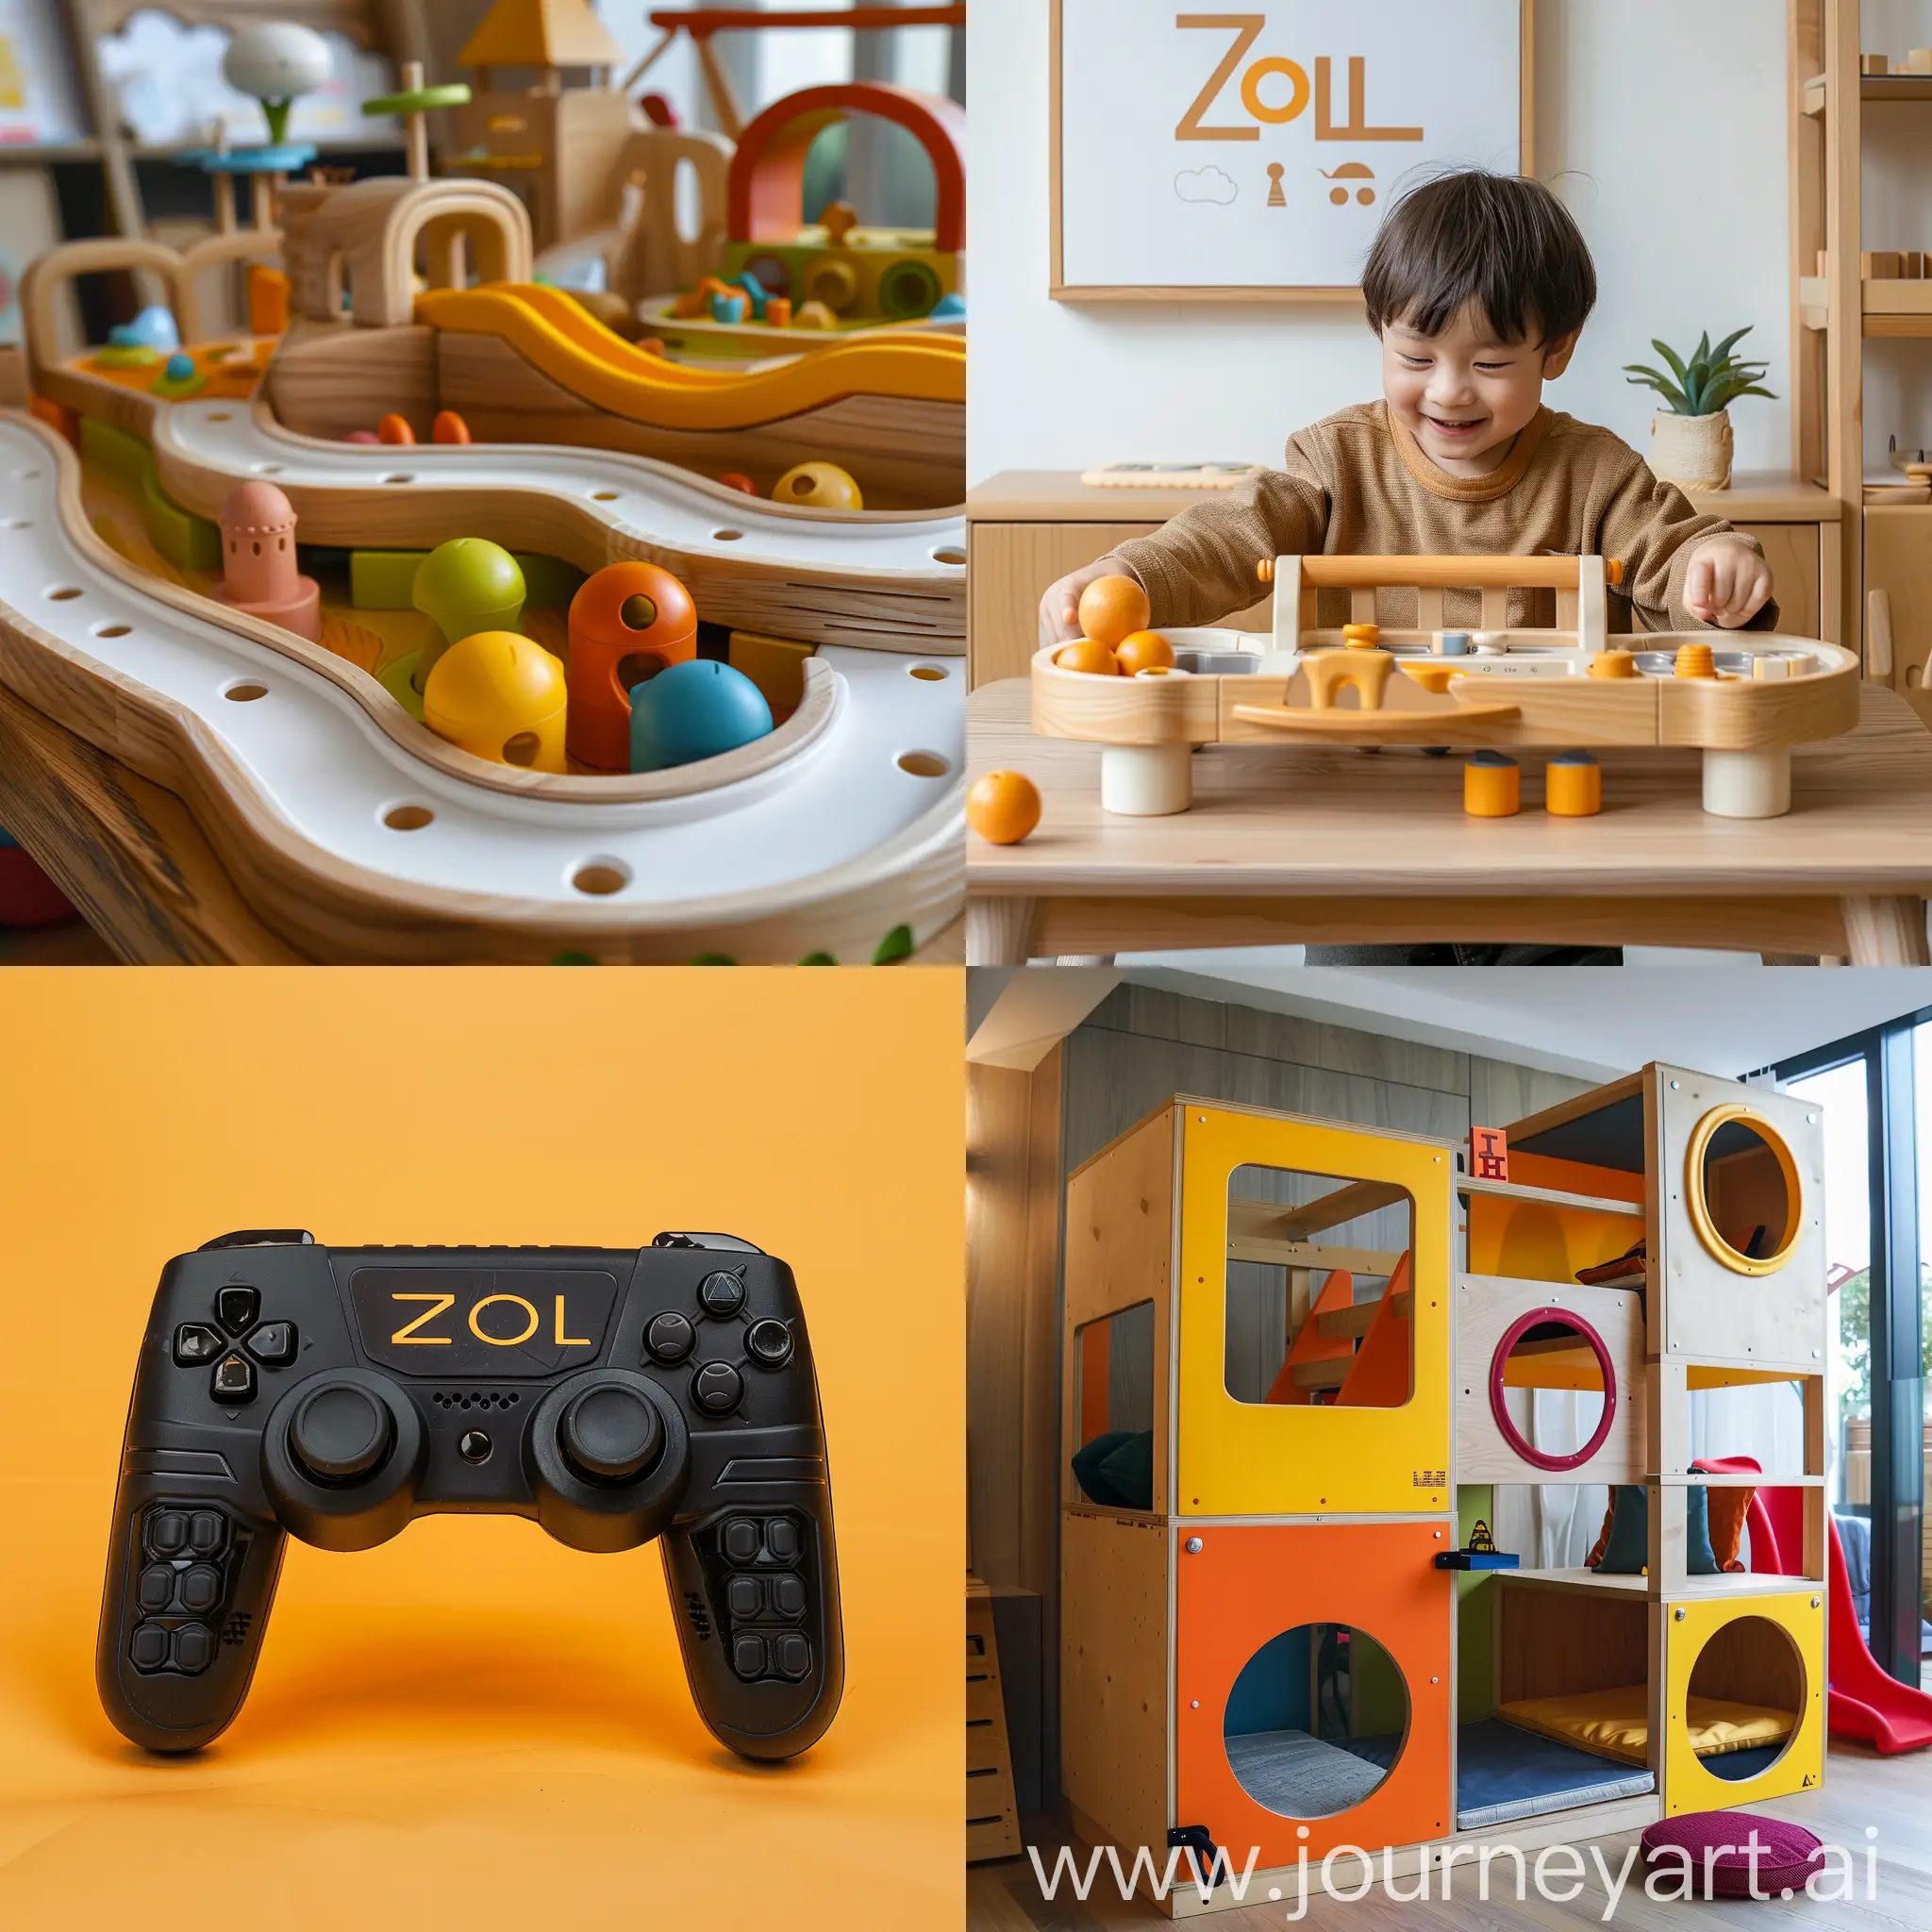 Children-Playing-with-ZOLI-Blocks-in-Vibrant-Playroom